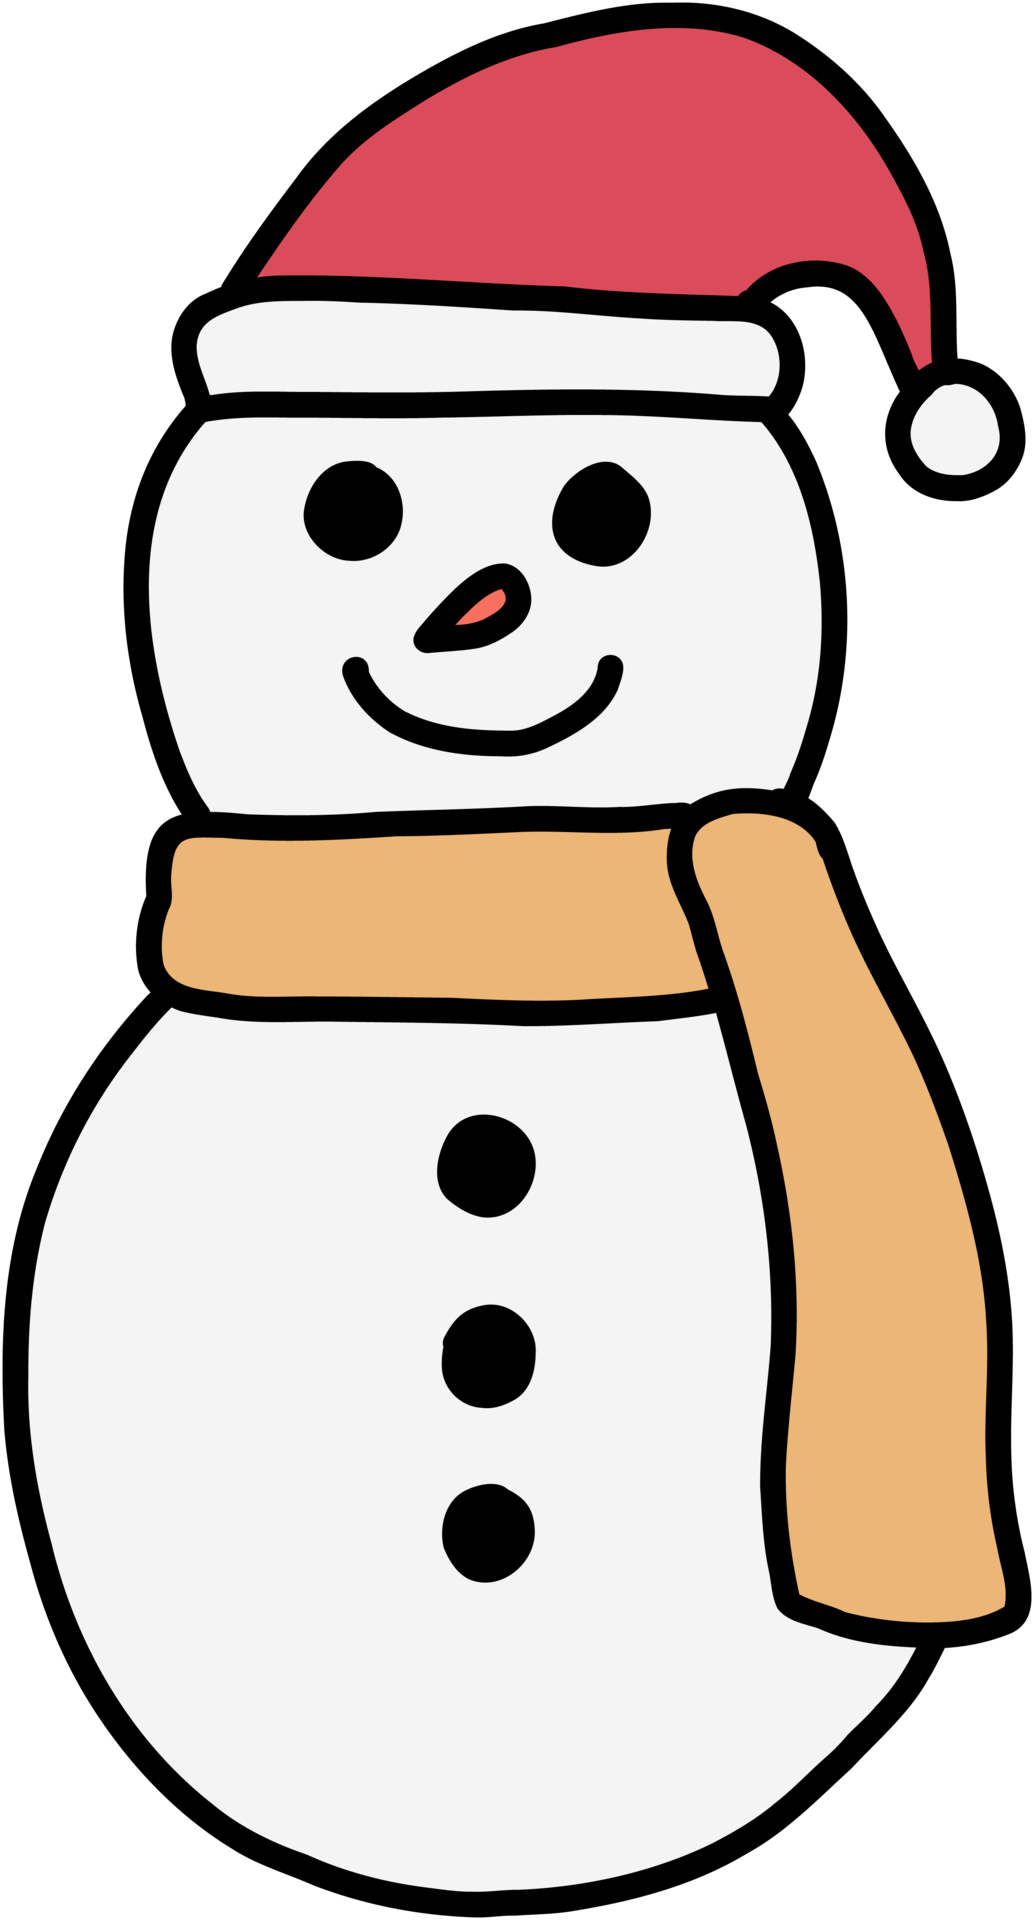 How to Draw a Cute Cartoon Snowman for Kids and Beginners  How to Draw  Step by Step Drawing Tutorials